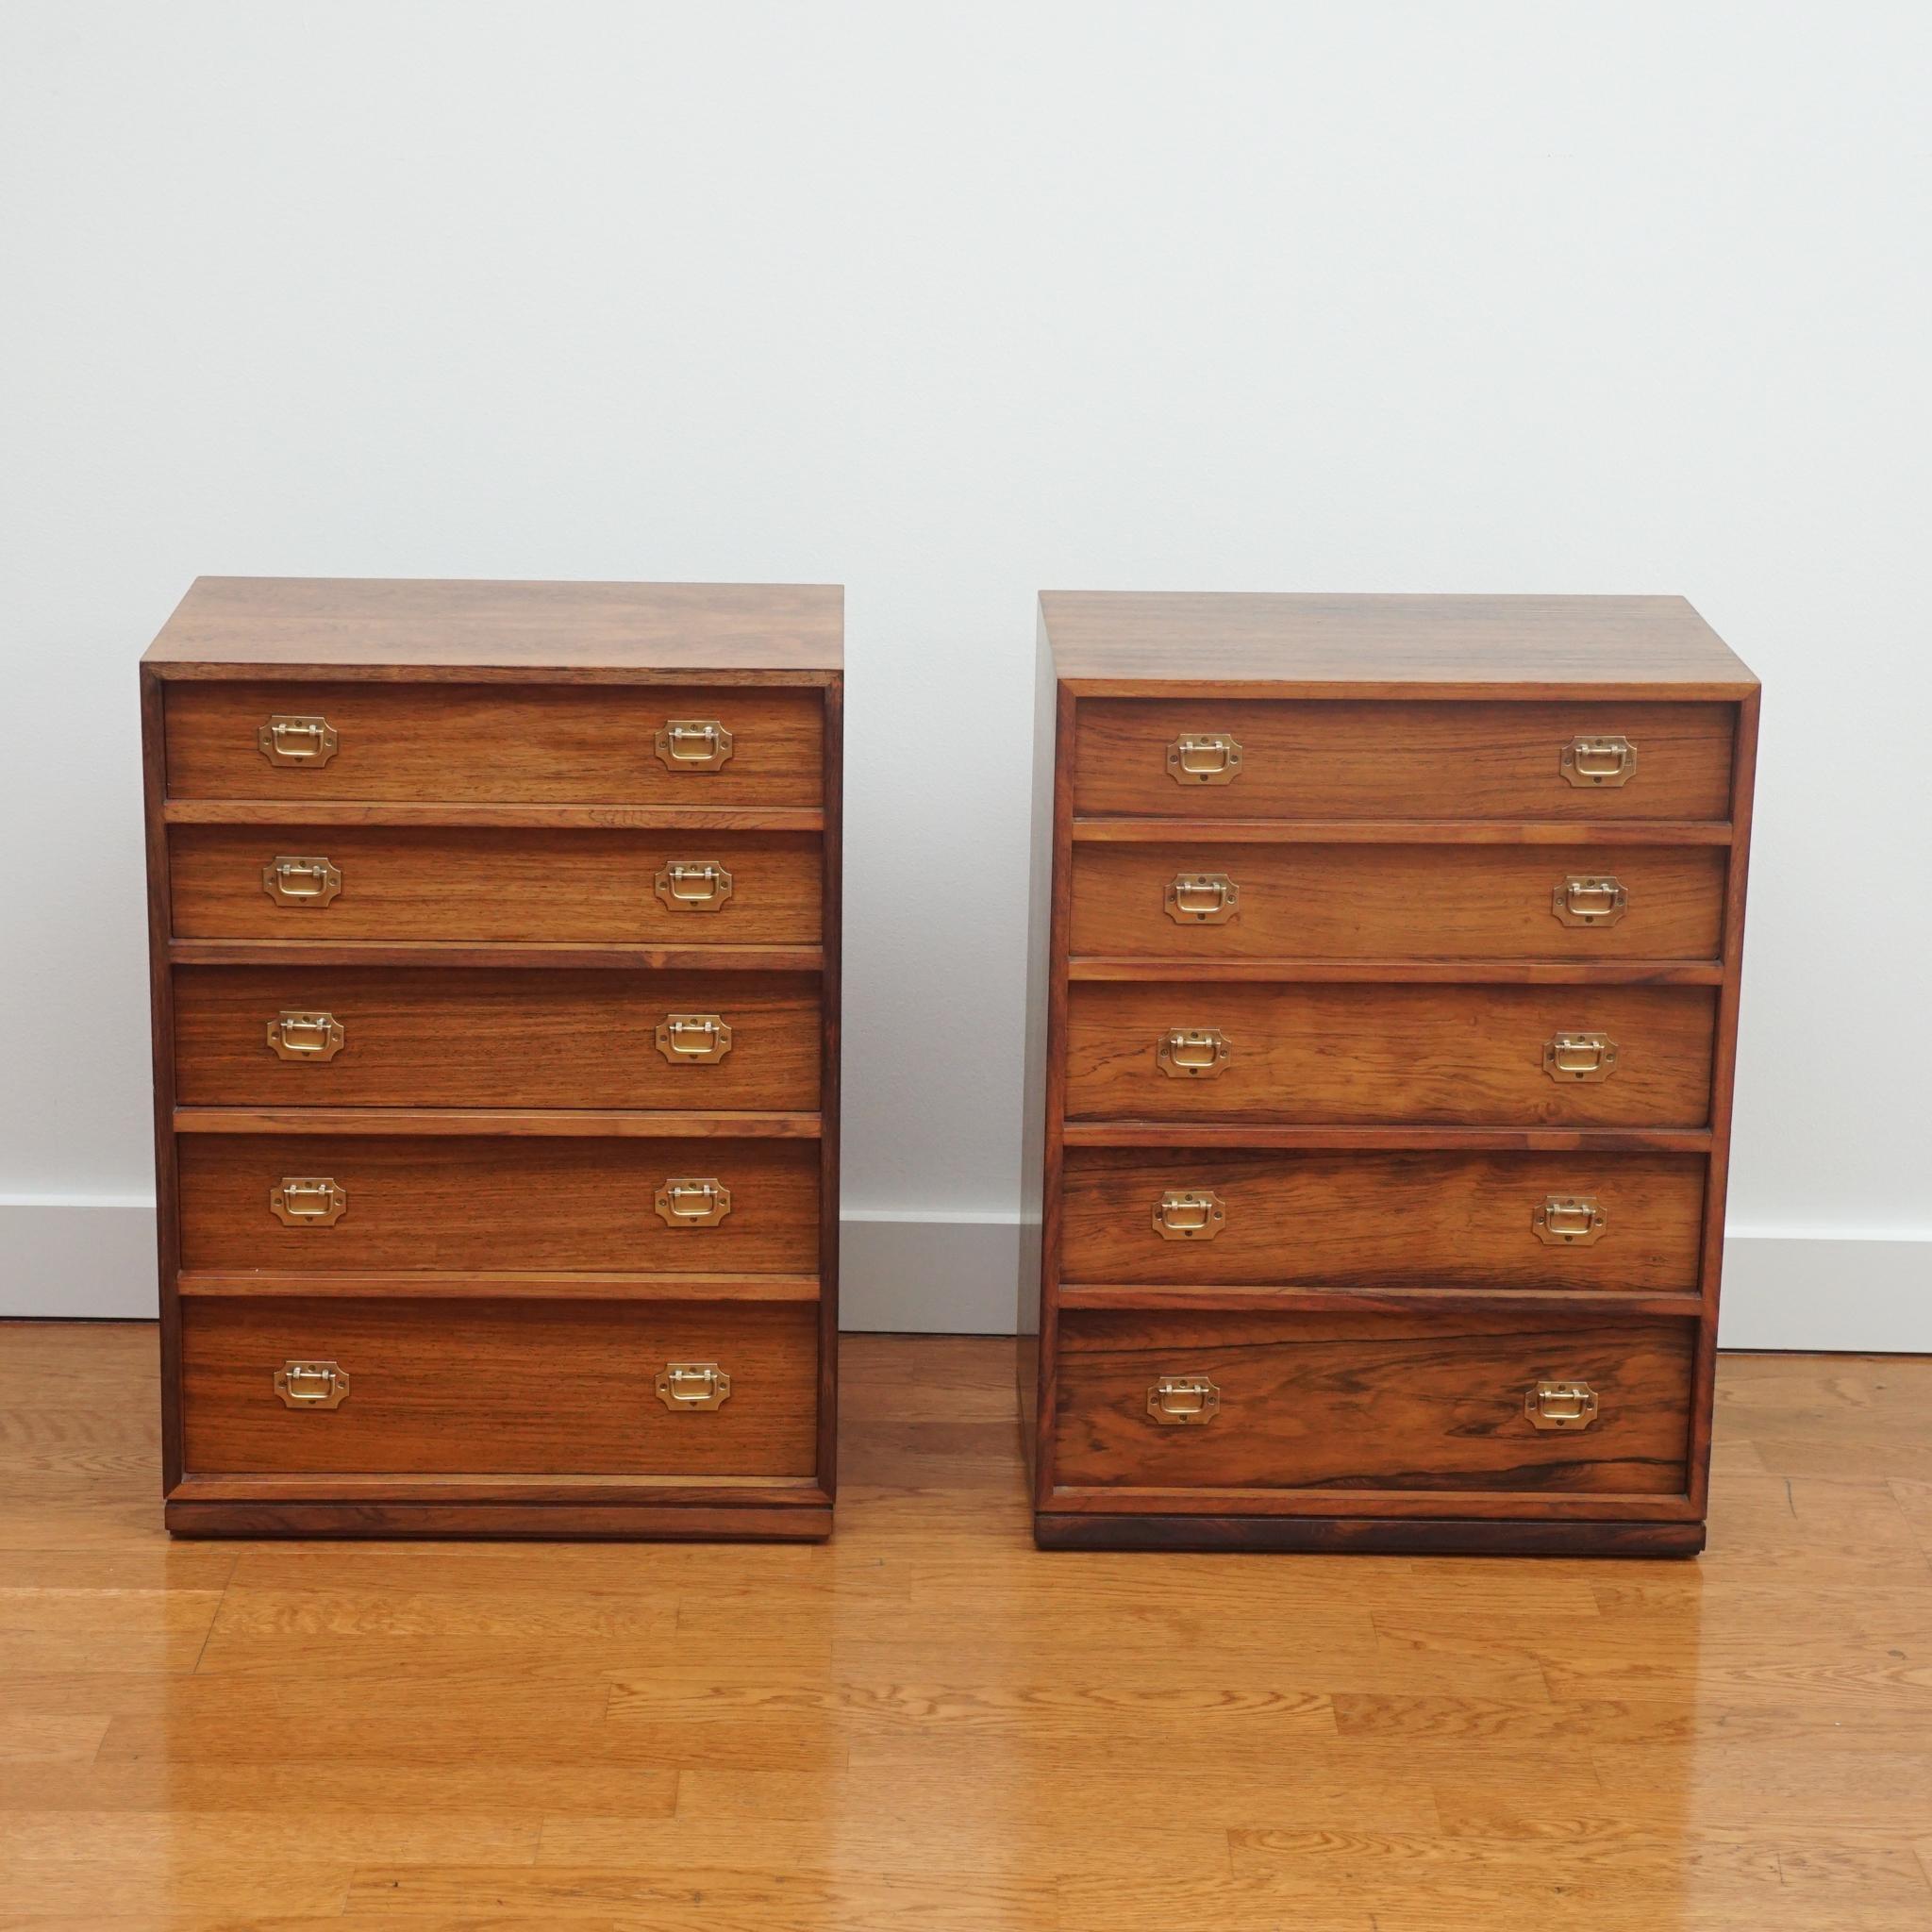 The pair of petite Danish mid-century nightstands, shown here, were designed by Henning Korch for Silkeborg Møbelfabrik. Fashioned after the designer's larger 